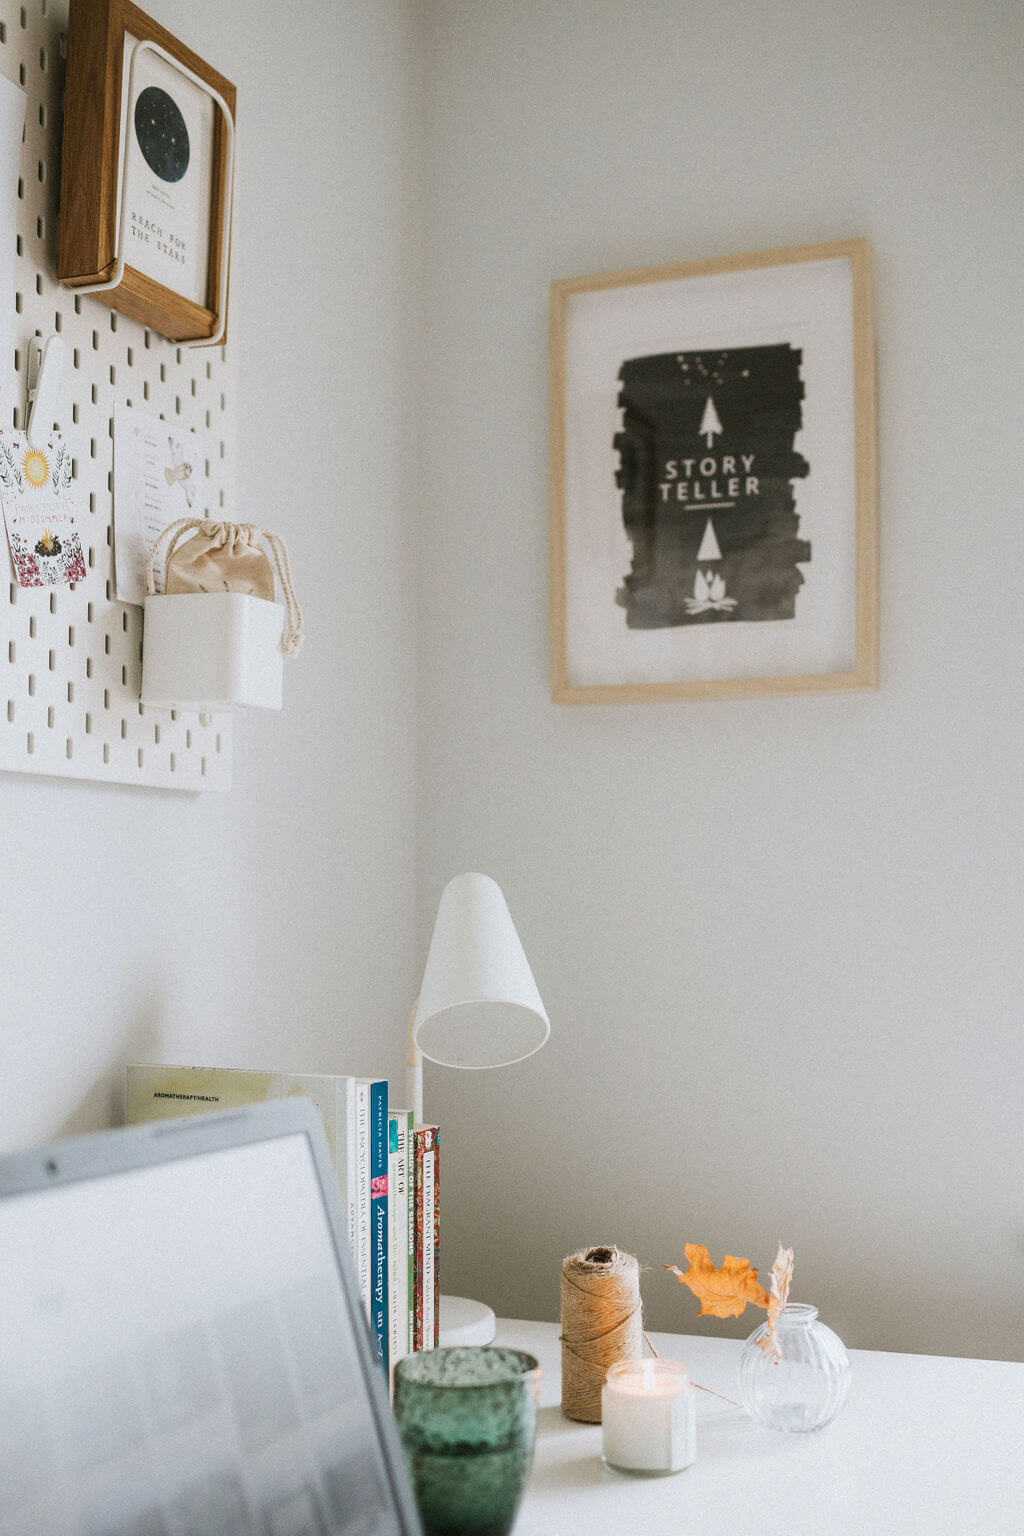 A Tour Of The Smallest Light Candle Studio | The Smallest Light ...